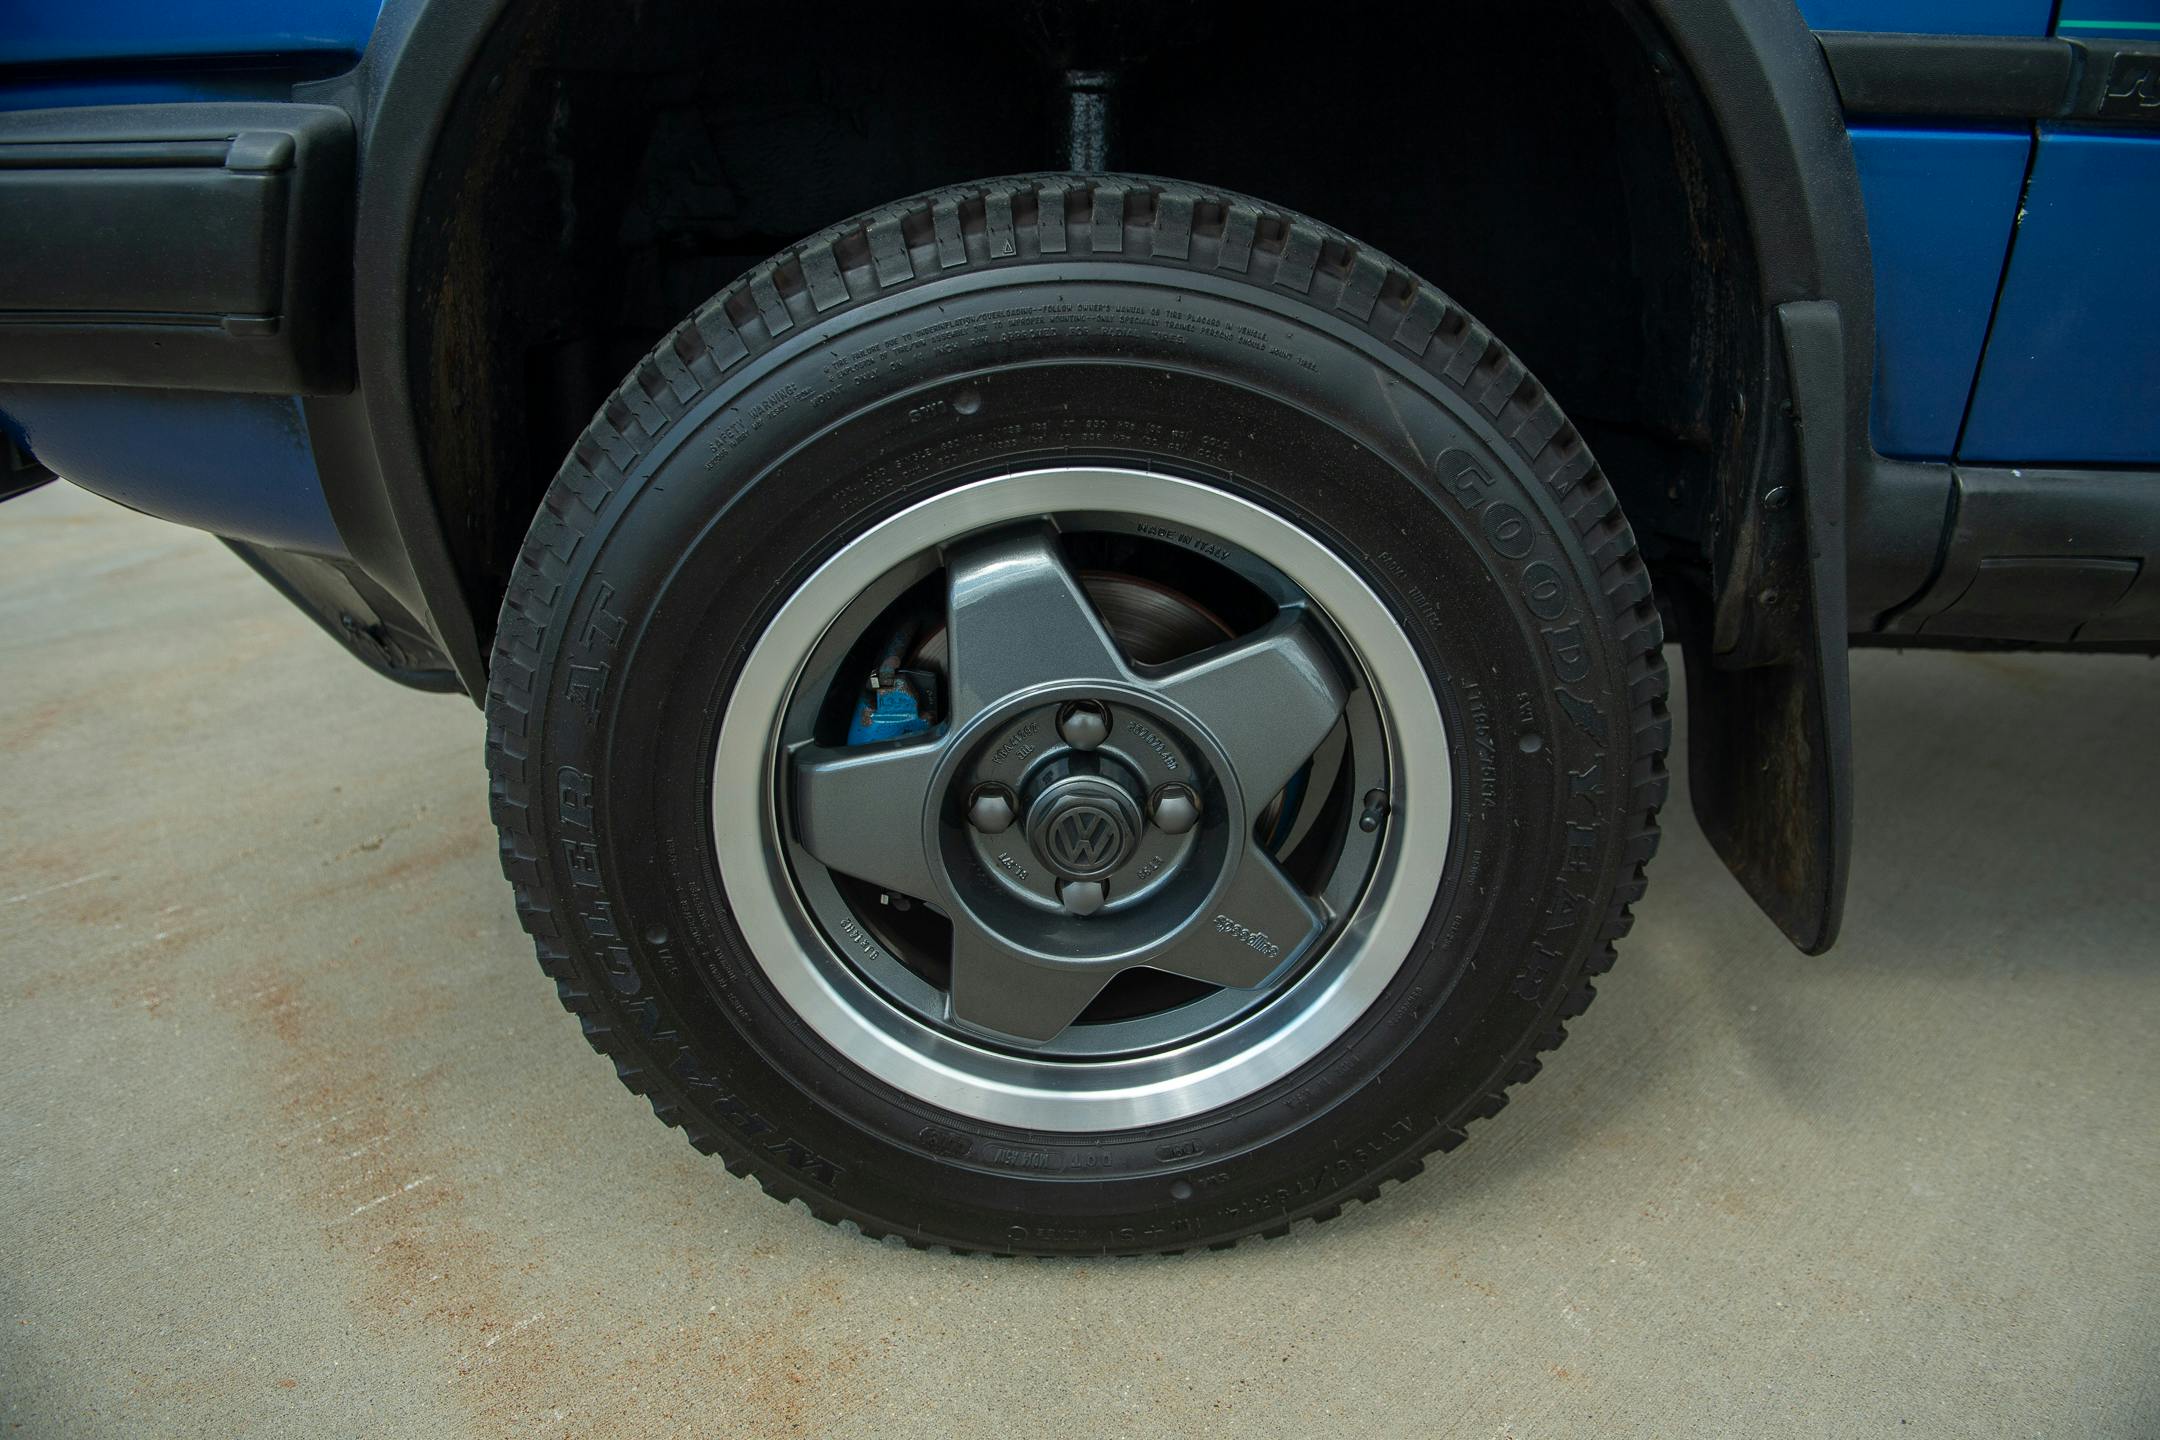 Volkswagen Golf Country wheel and tire